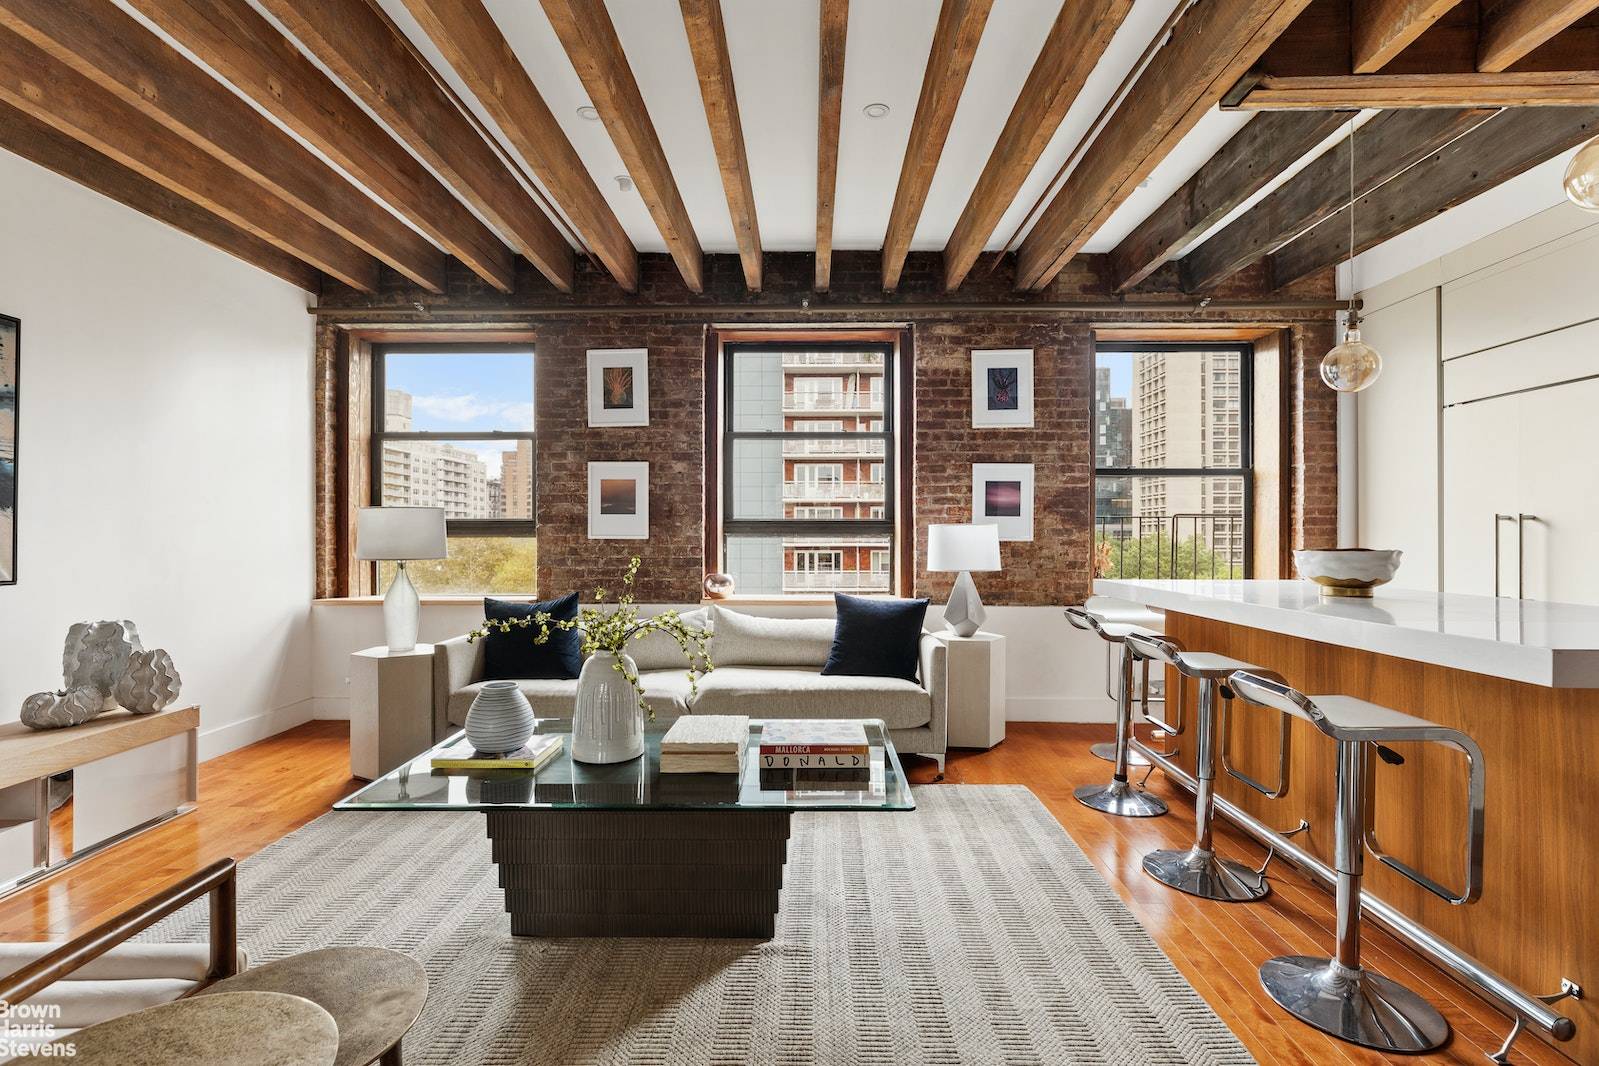 Situated in the heart of Greenwich Village, this 7th floor loft penthouse at 520 LaGuardia Place is the pinnacle of modern meets industrial luxury.